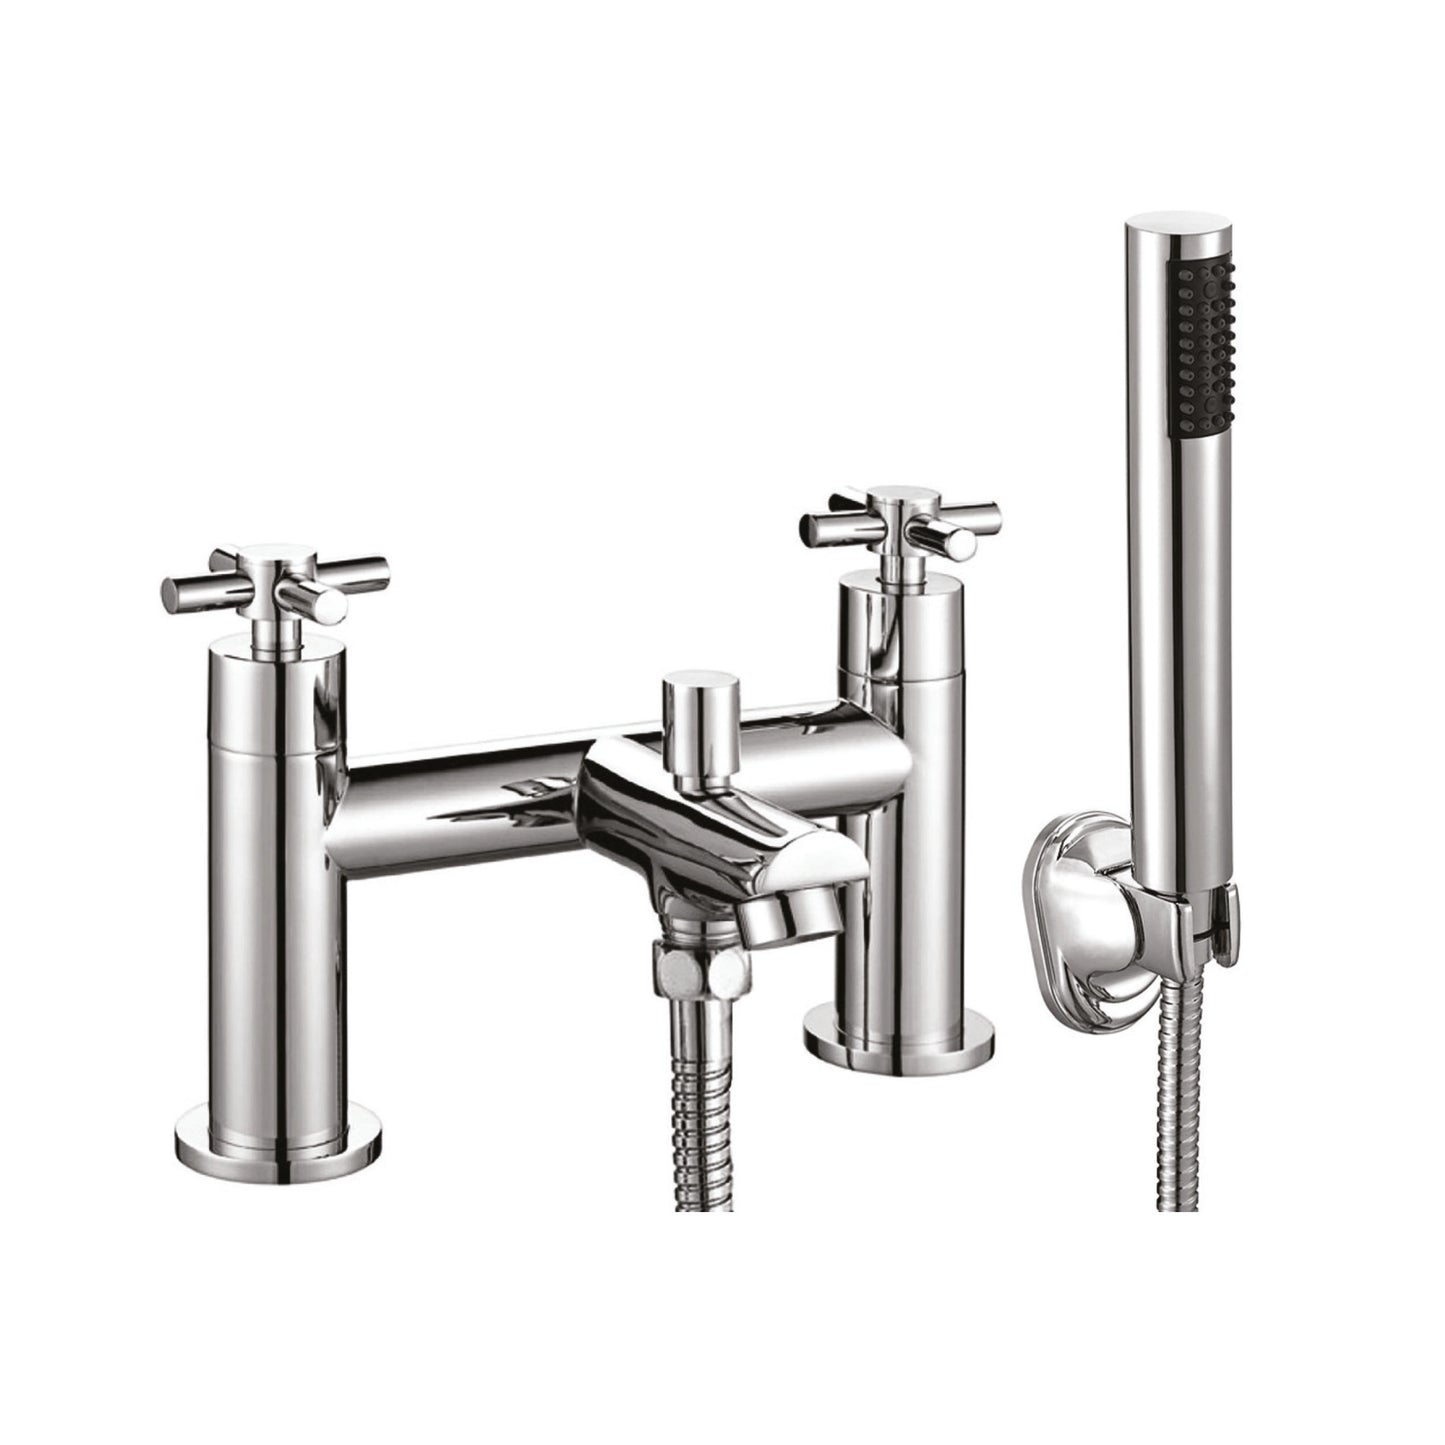 Kross Bath Shower Mixer Tap with Shower Kit and Wall bracket